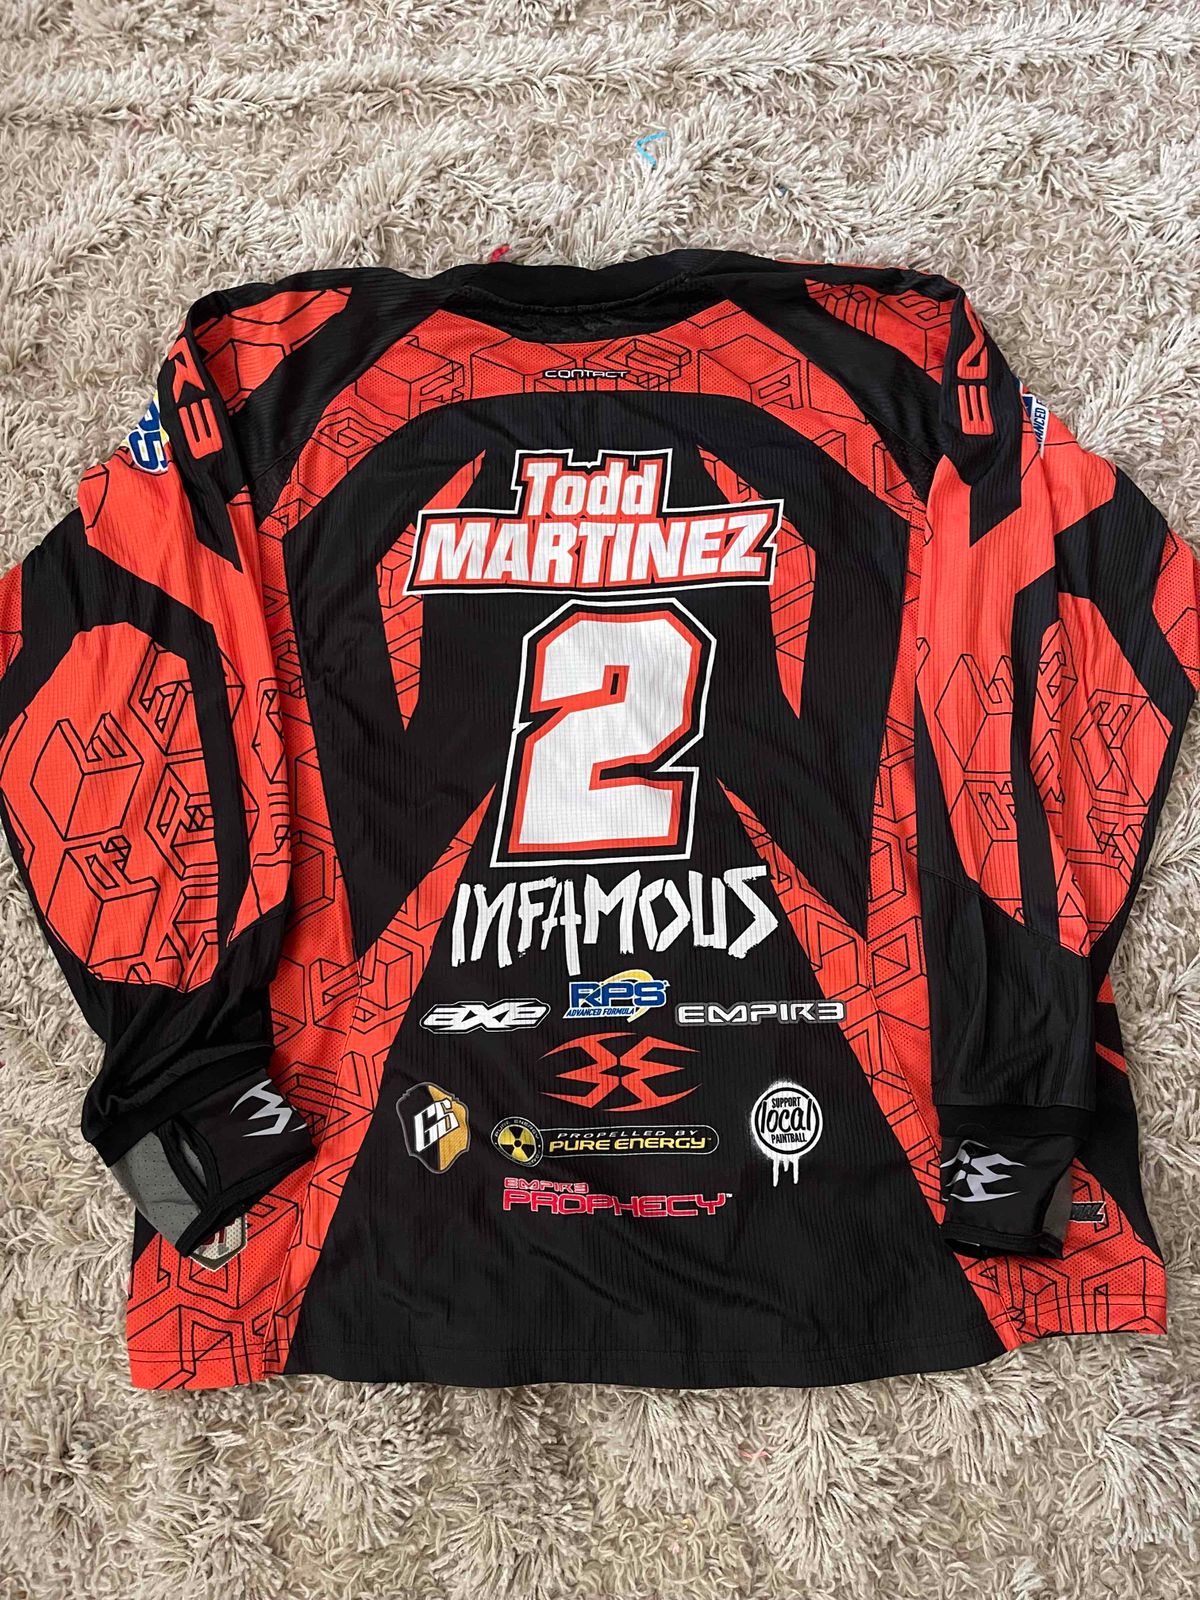 Todd Martinez Infamous Jersey